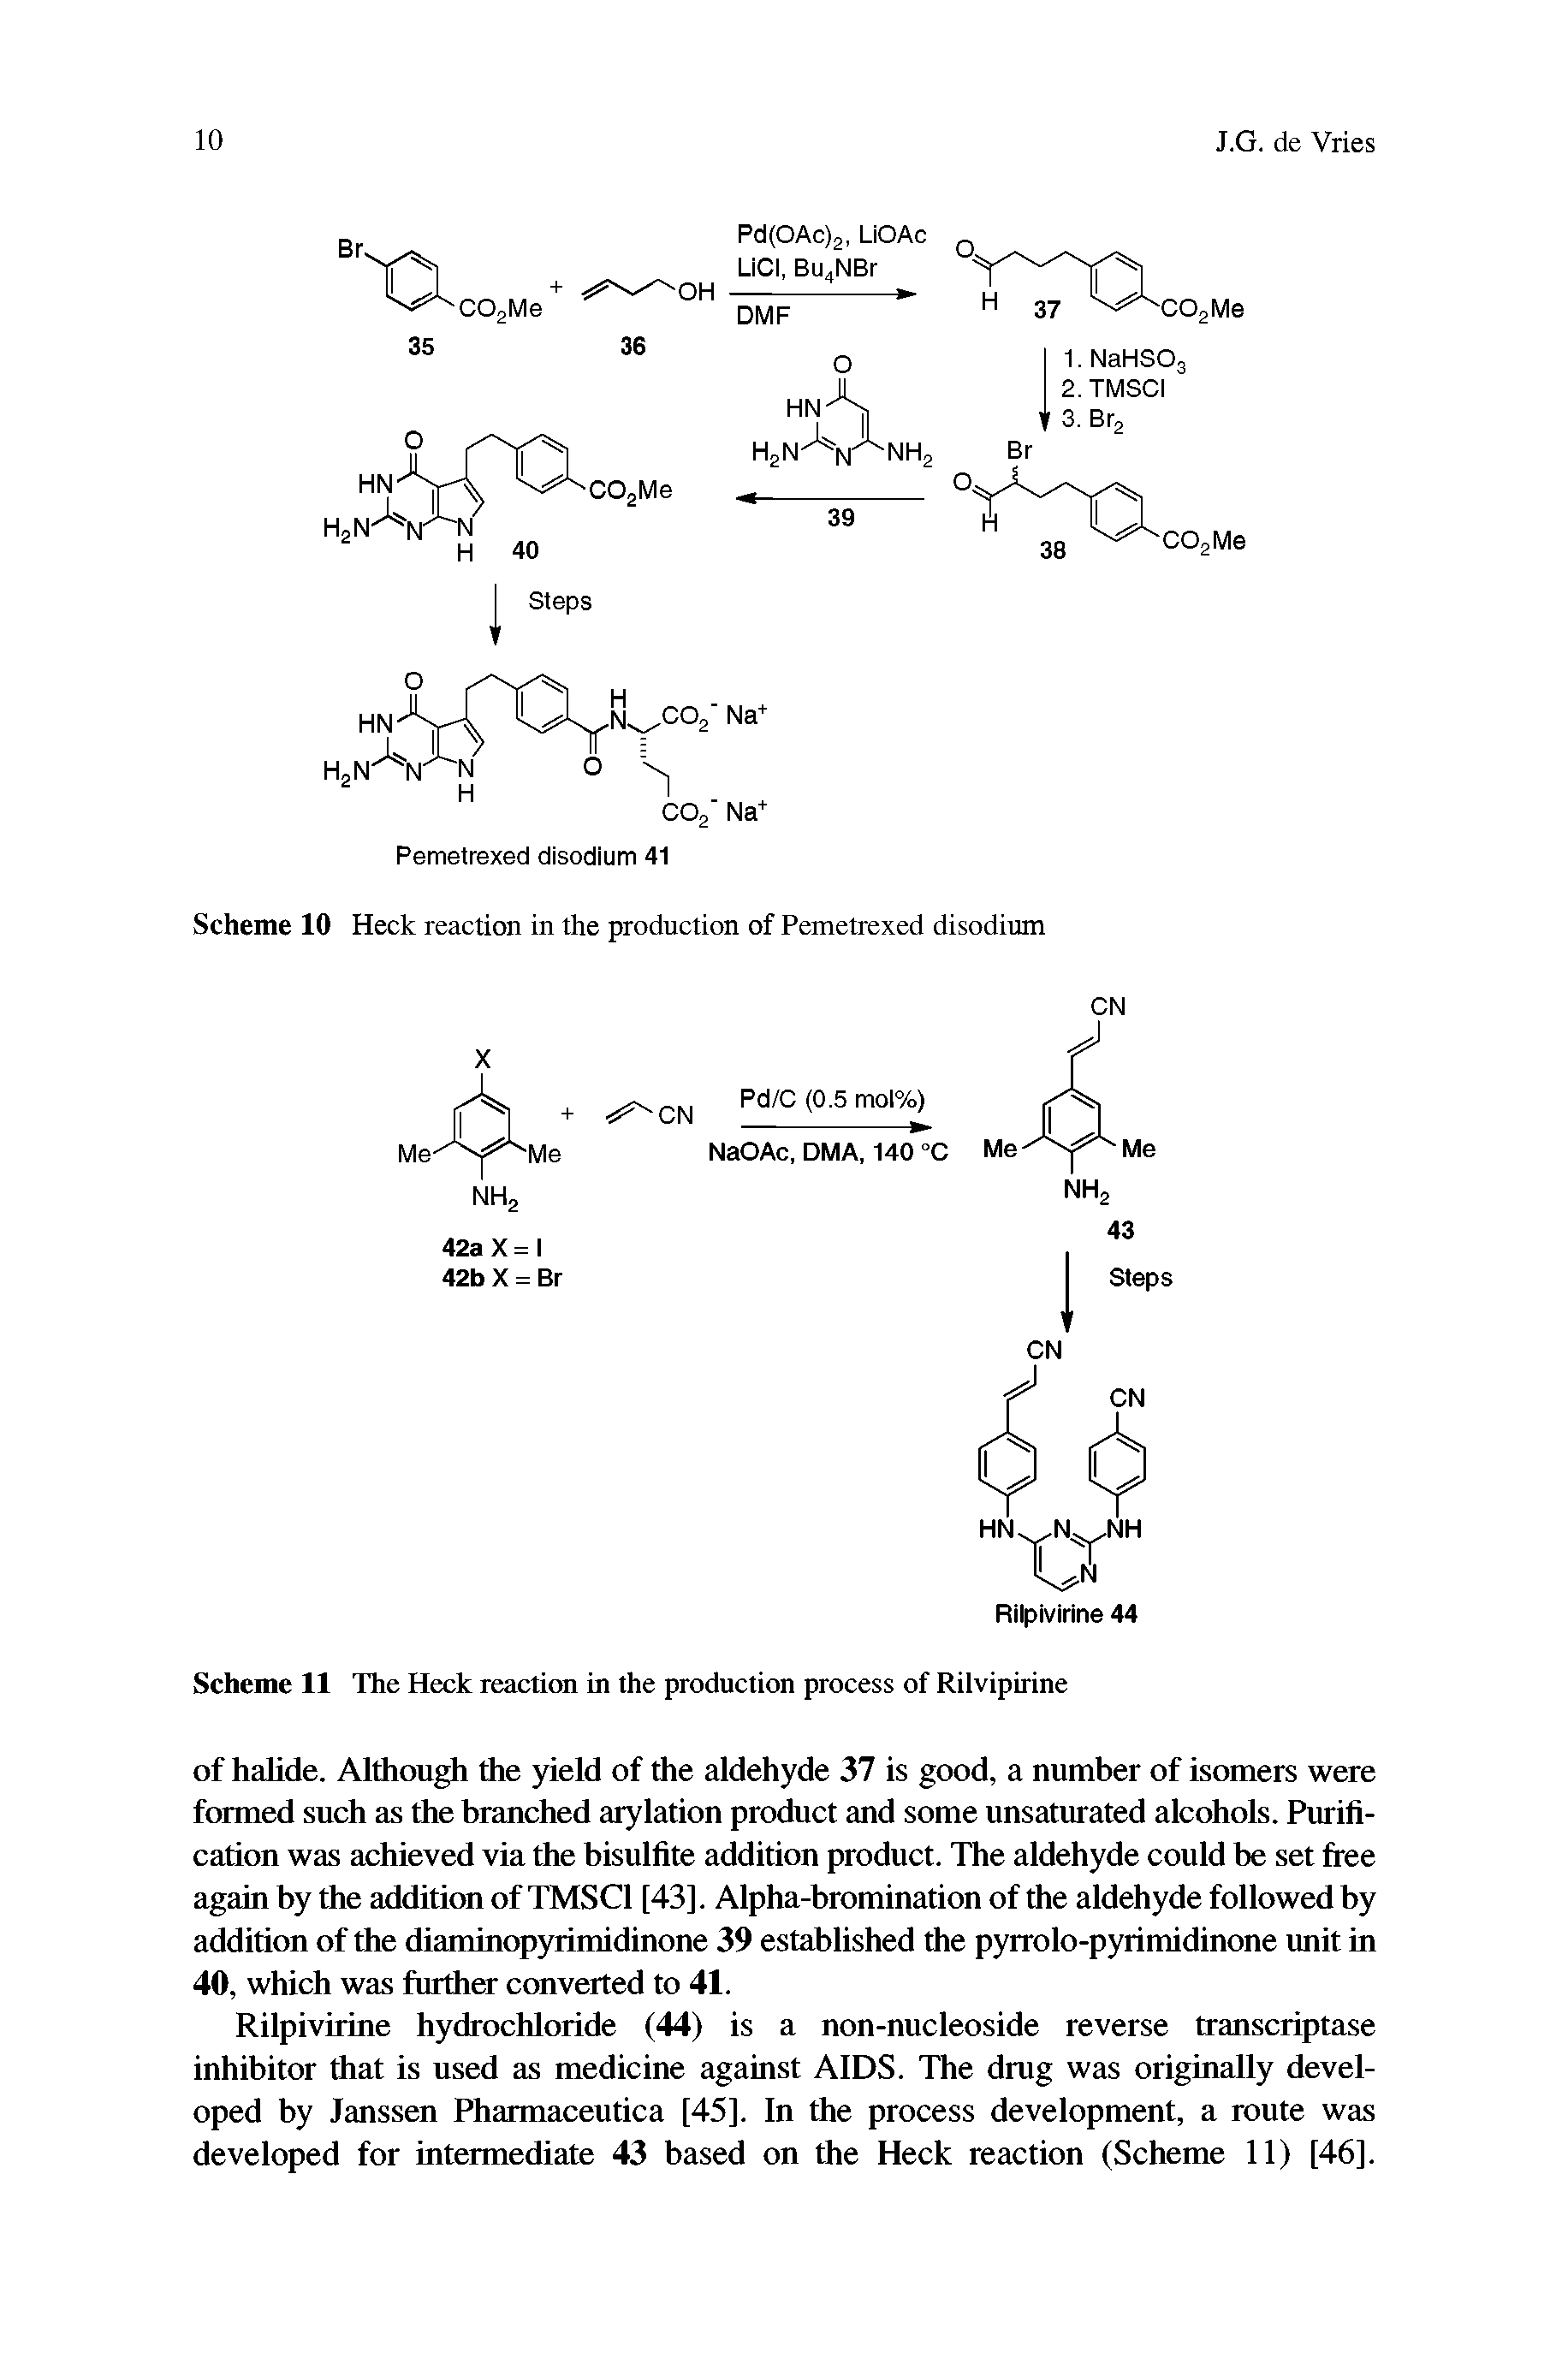 Scheme 10 Heck reaction in the production of Pemetrexed disodium...